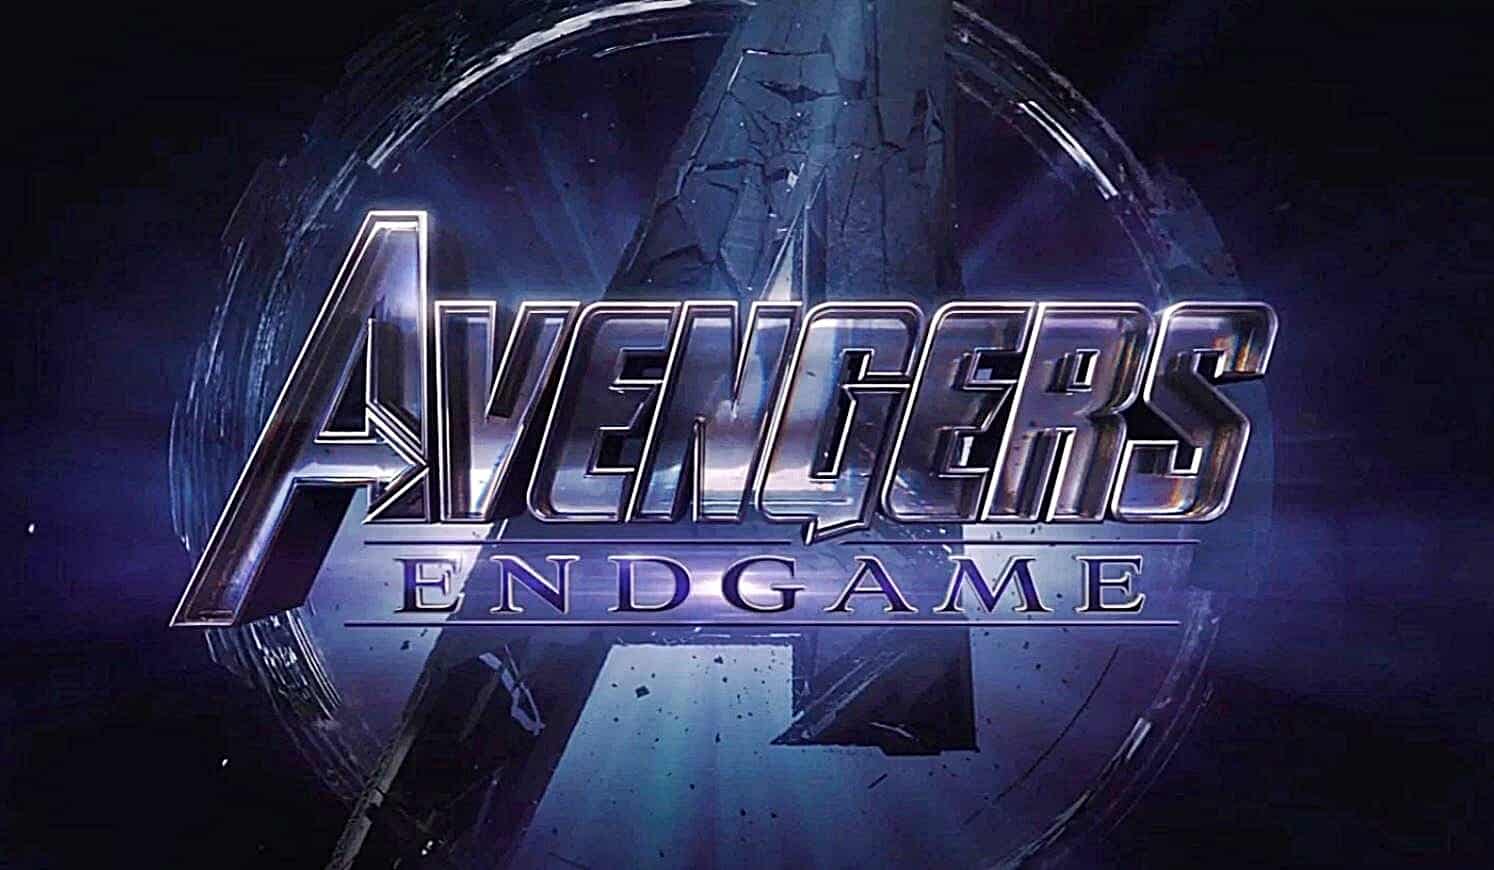 Why The Russo Brothers Lied About 'Avengers: Endgame' Title1494 x 870